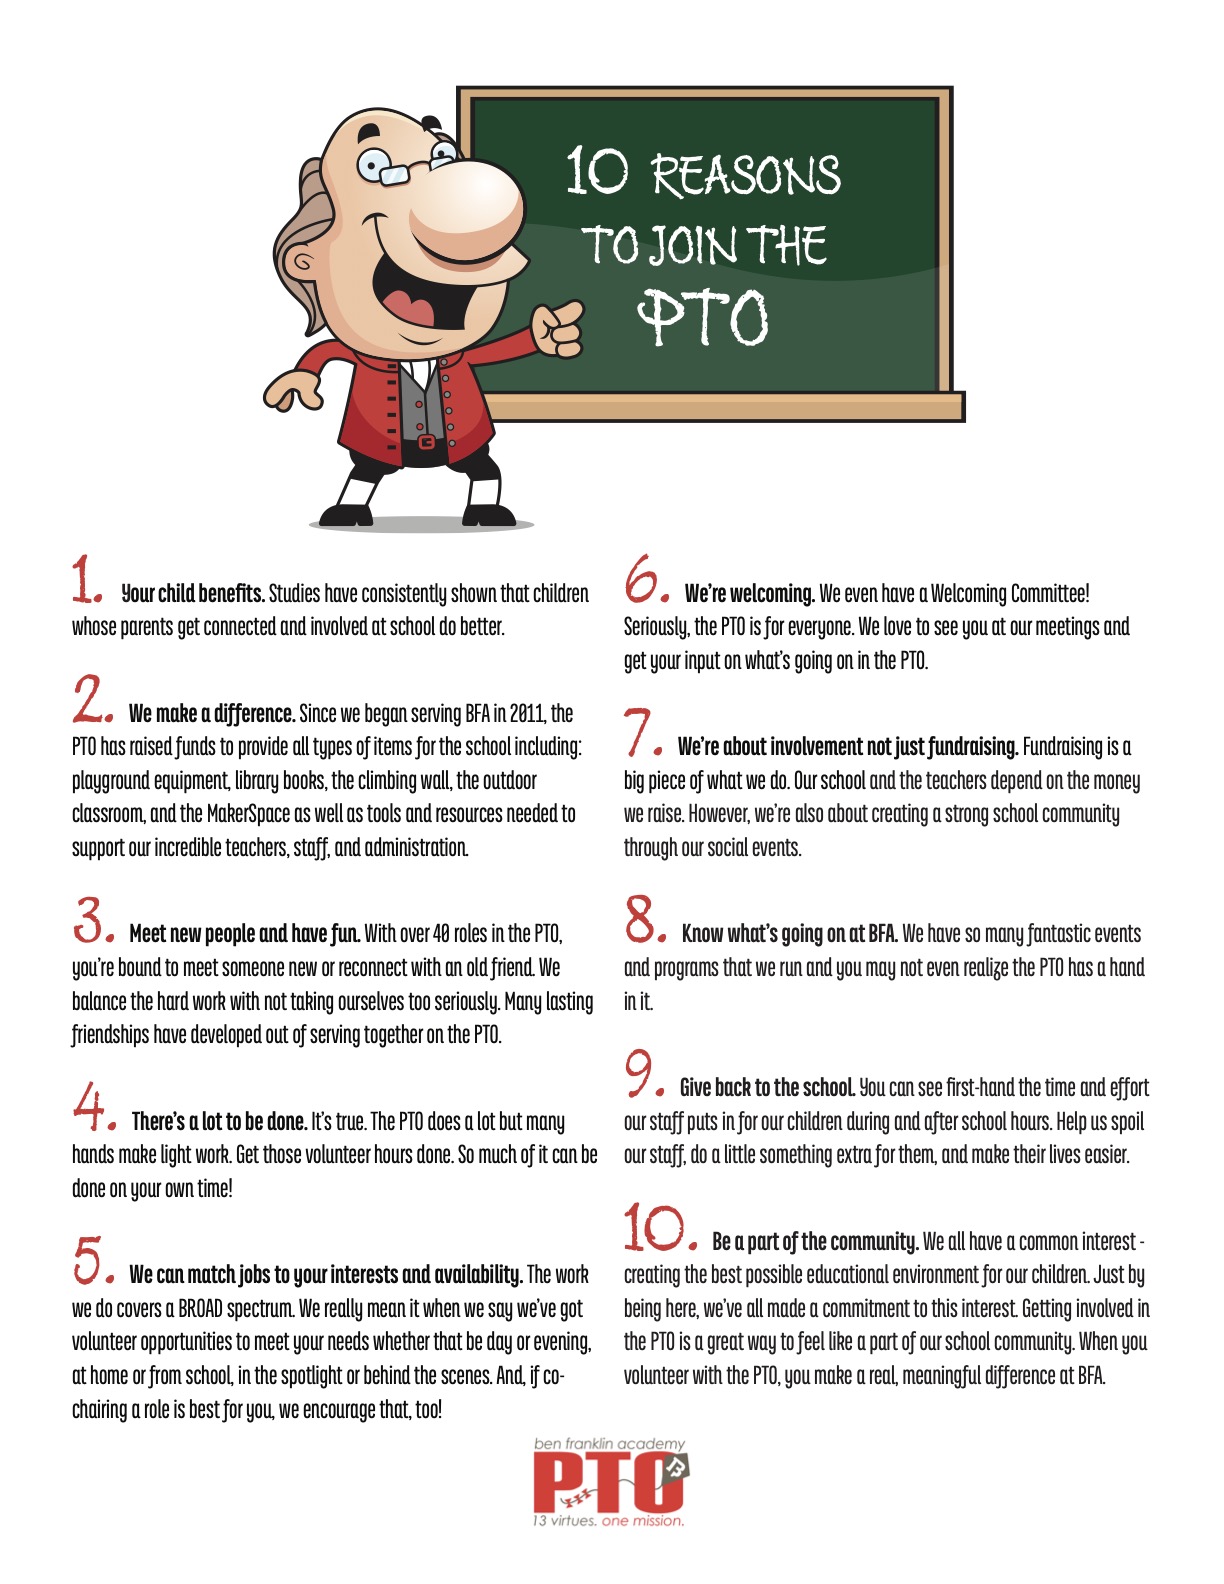 10 reasons to join the PTO